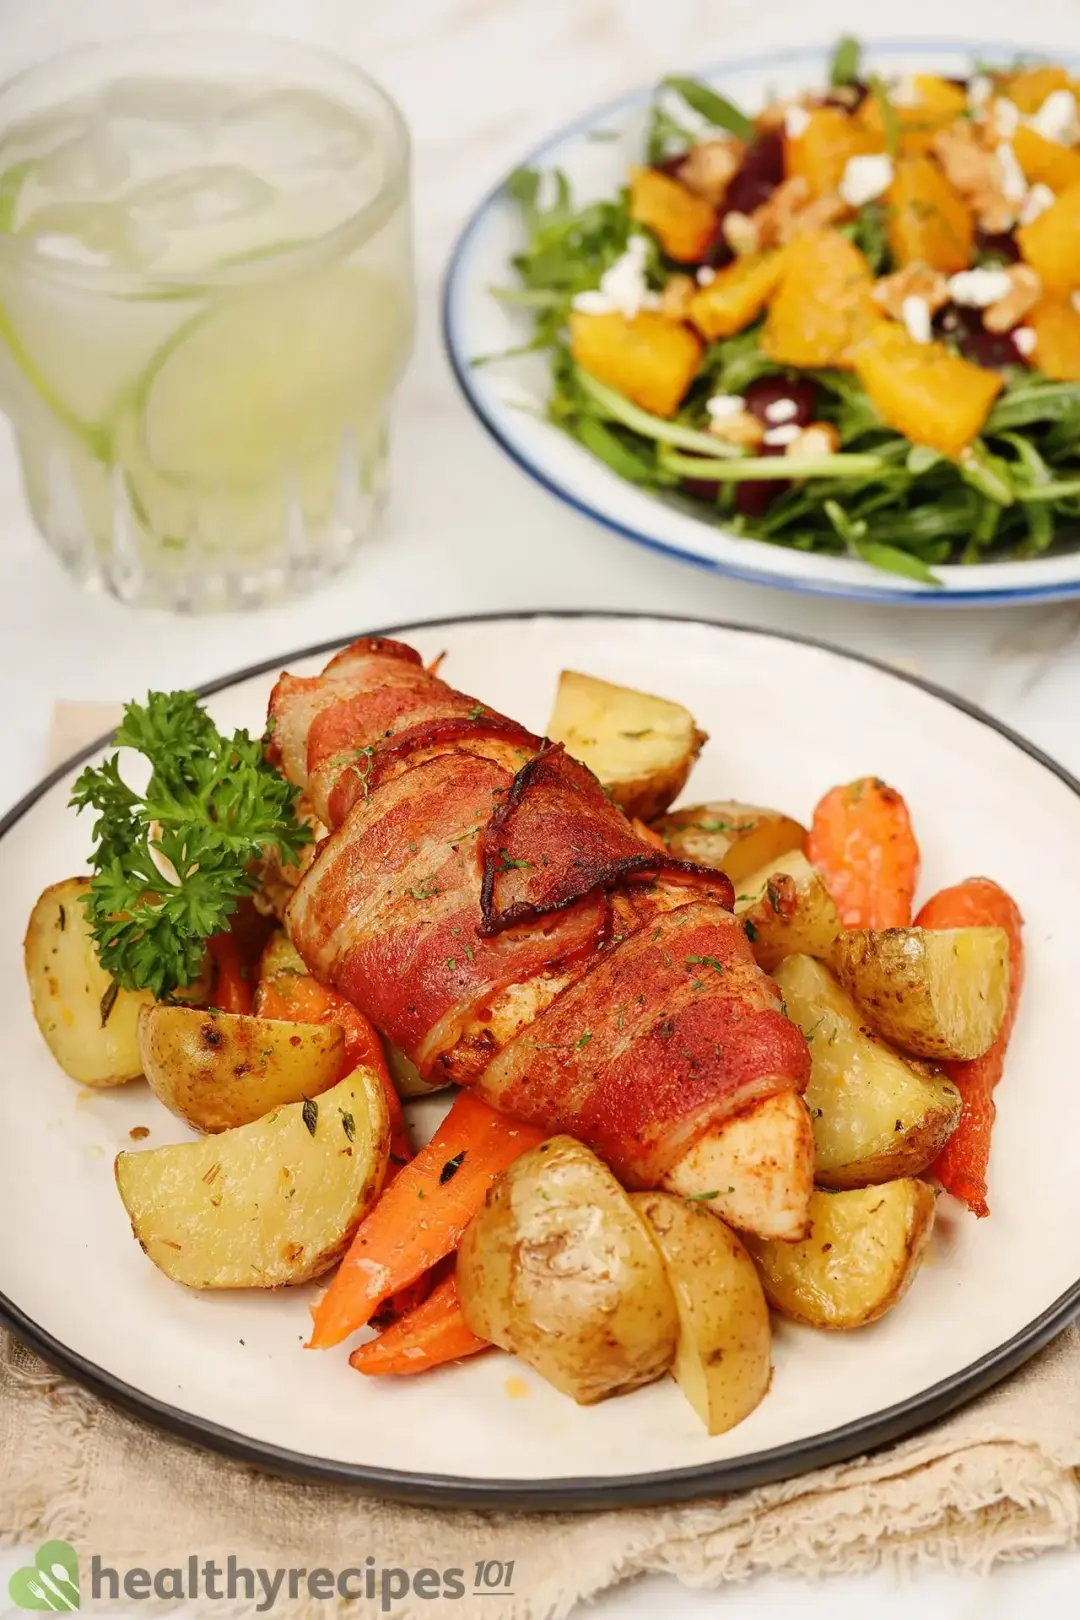 What to Serve With Bacon Wrapped Chicken